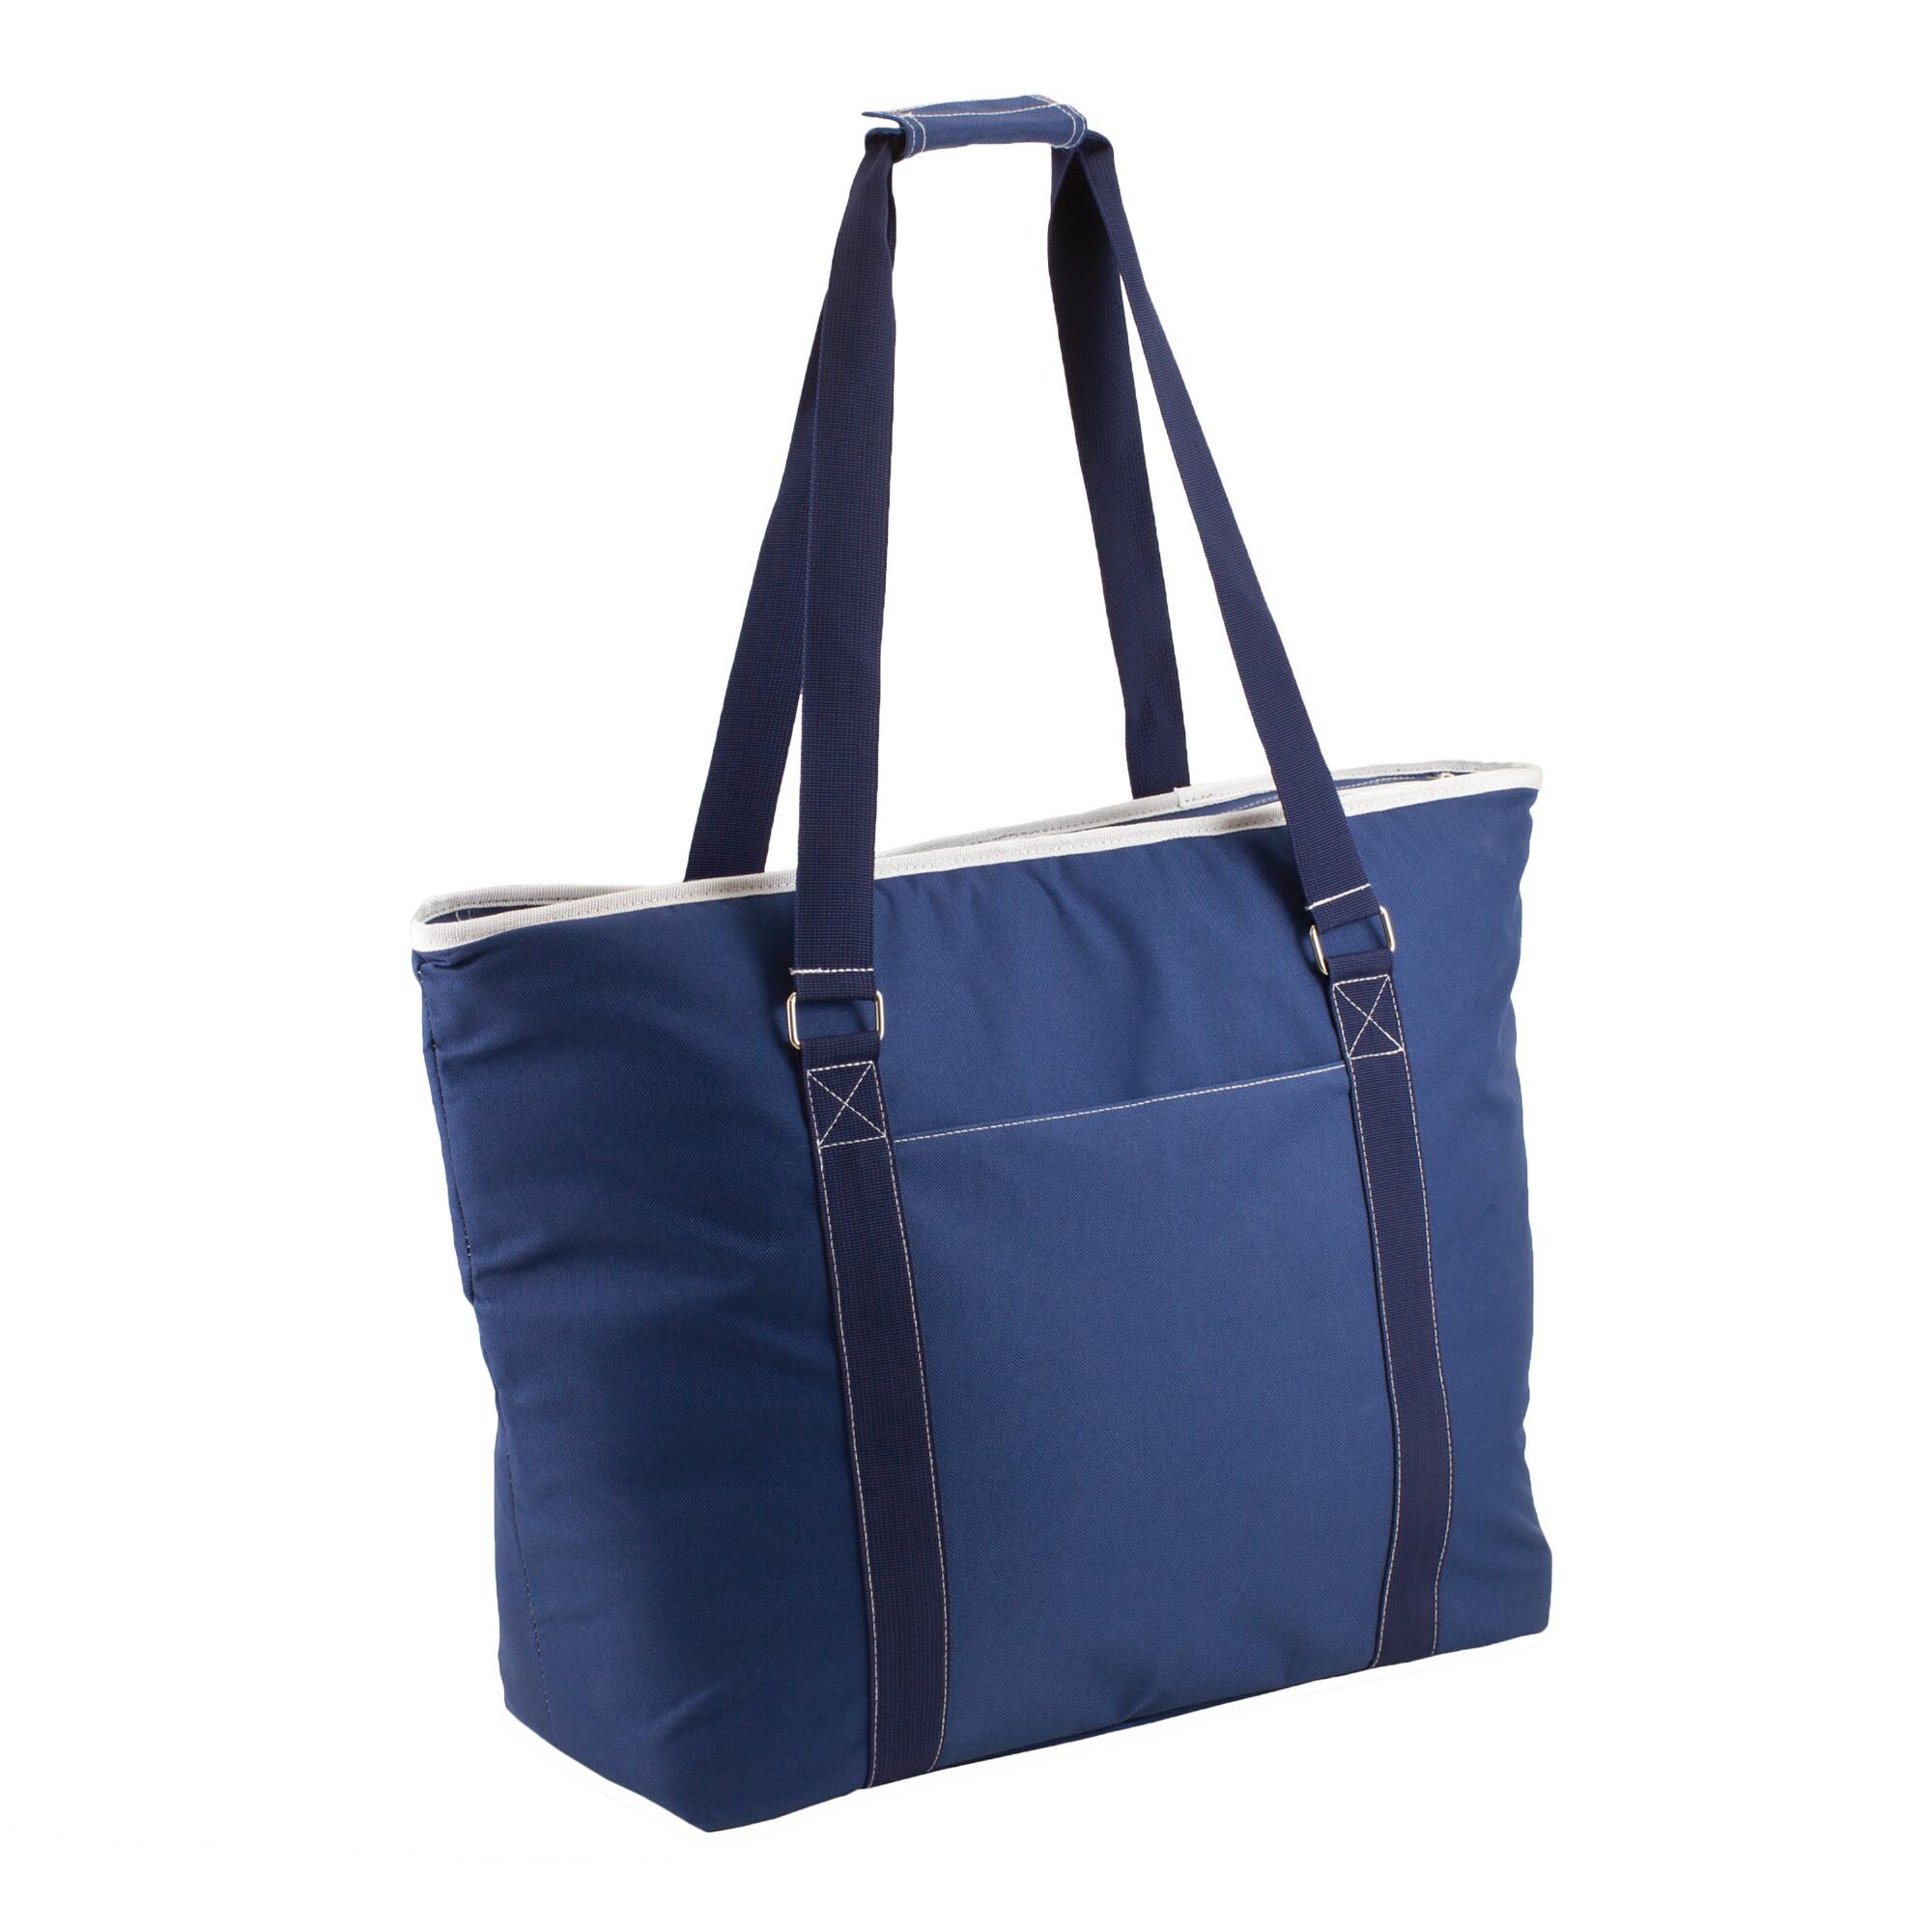 Blue Insulated Cooler Tote by World Market